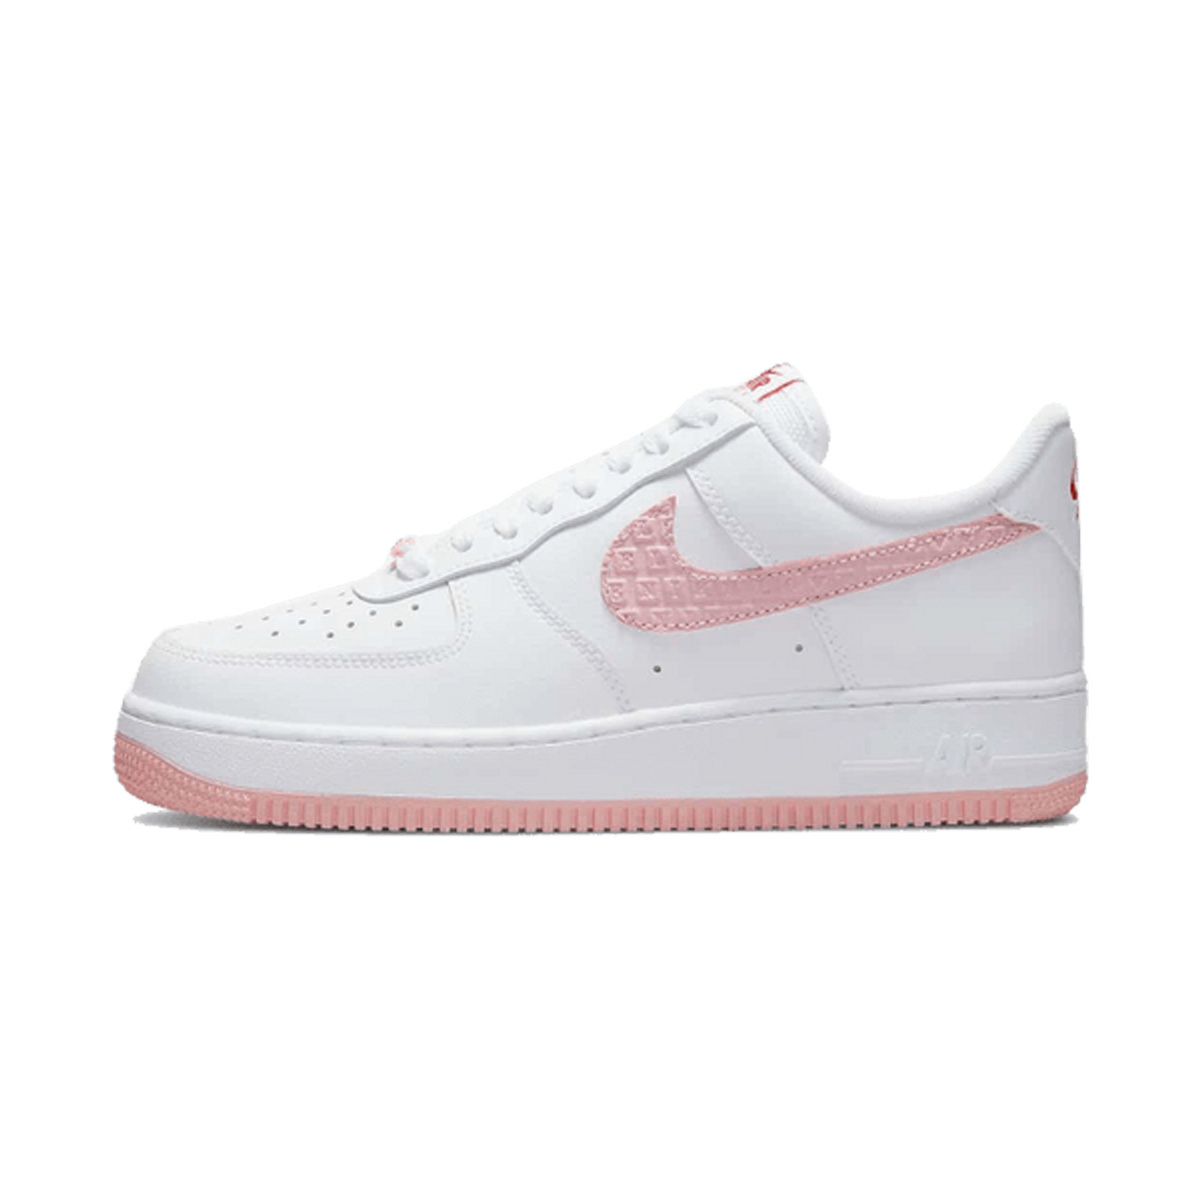 Nike WMNS Air Force 1 '07 "Valentine's Day" DQ9320-100